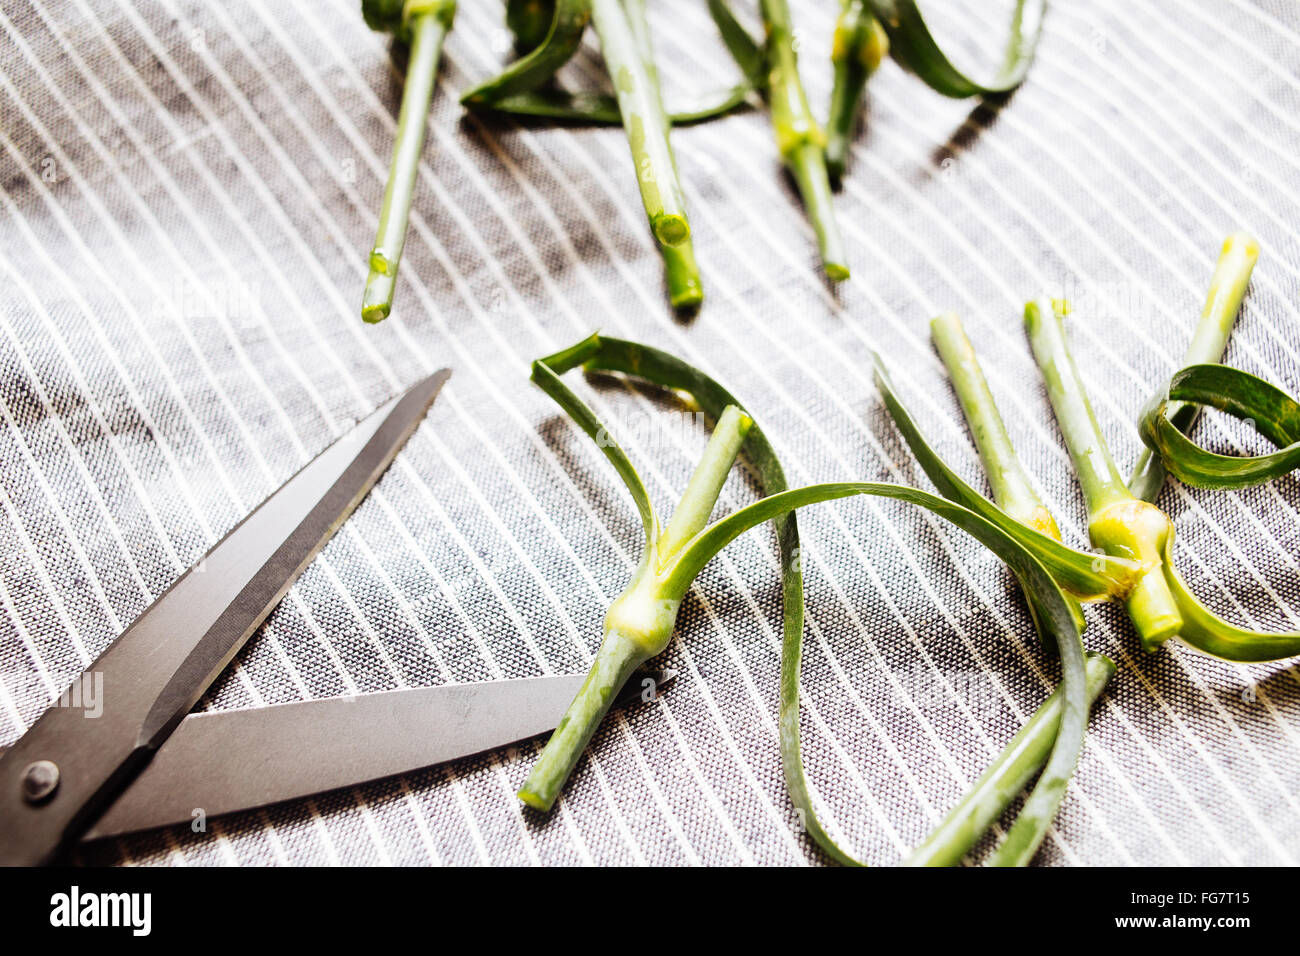 Scissors and cutted stems Stock Photo